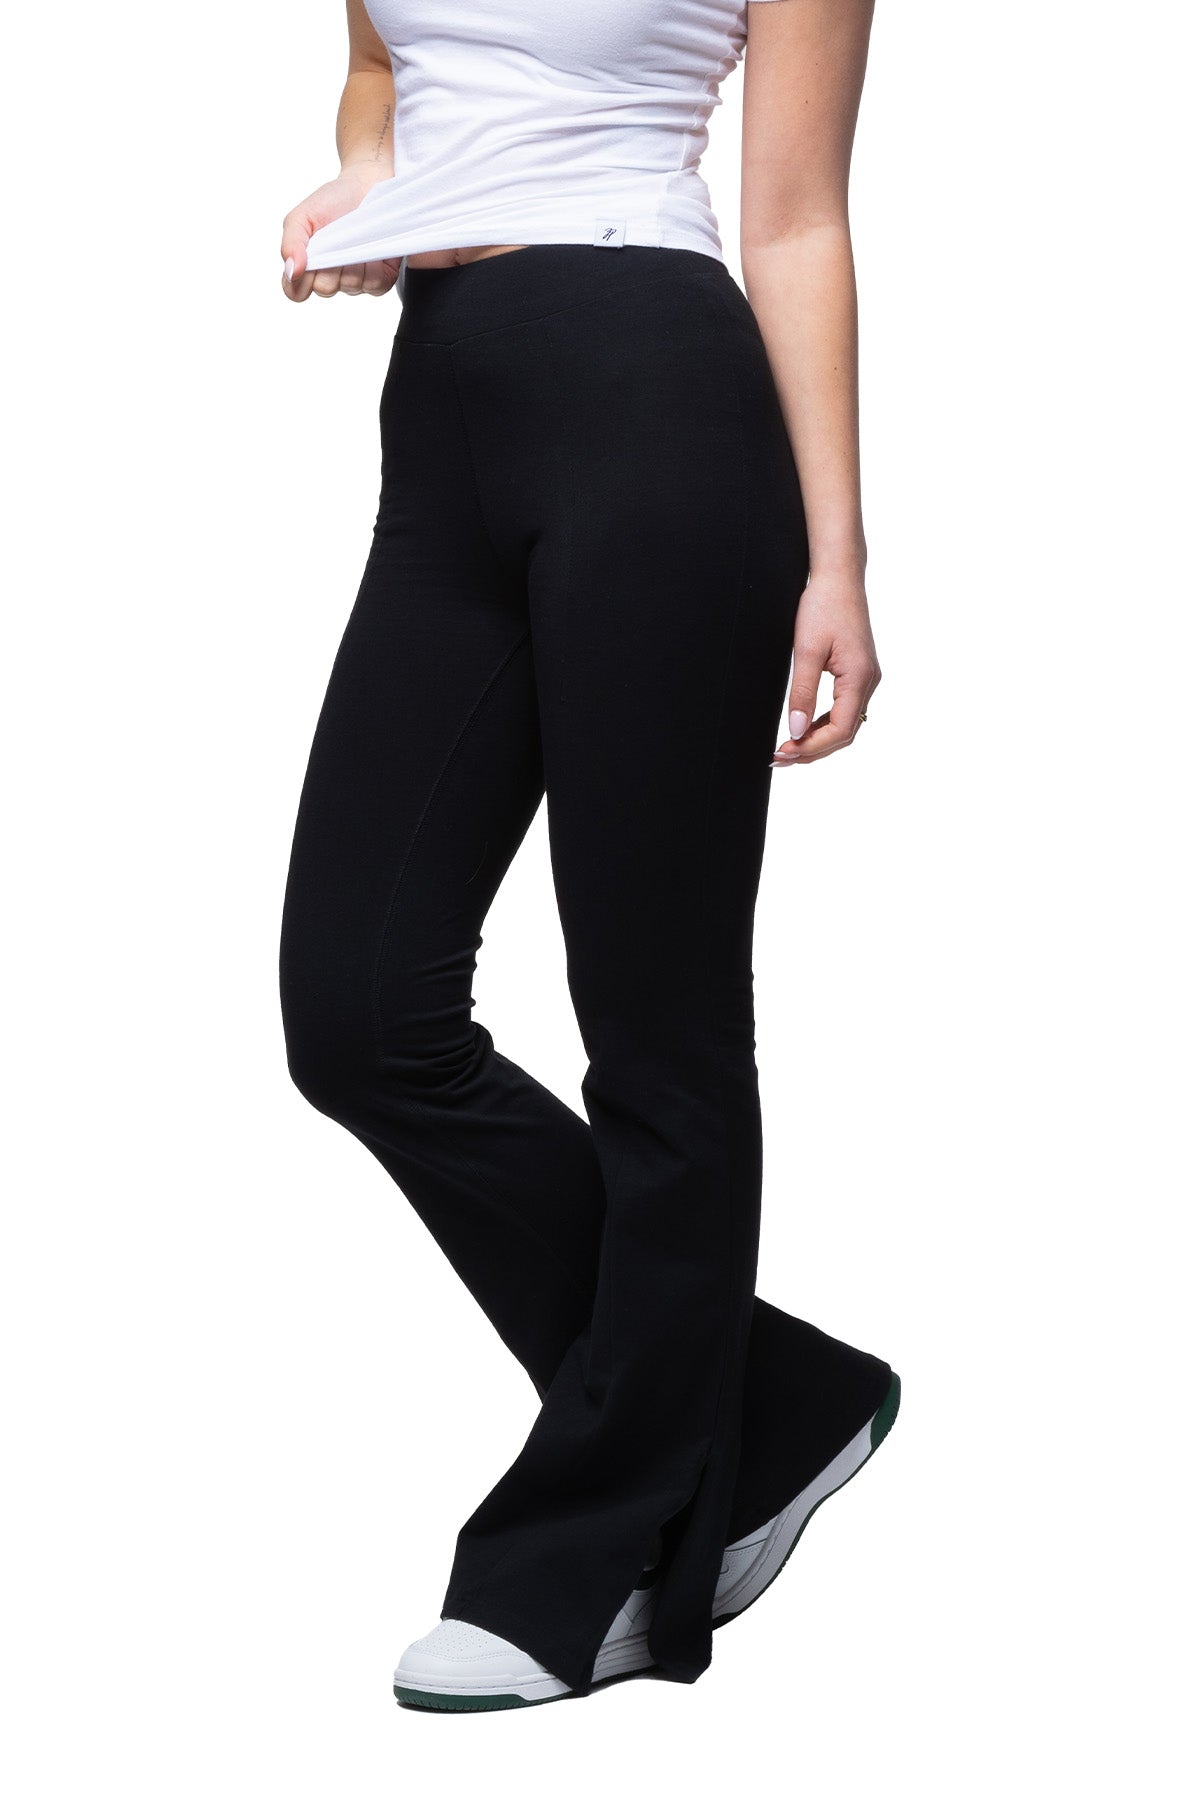 Tori - Flared Pant with Slit